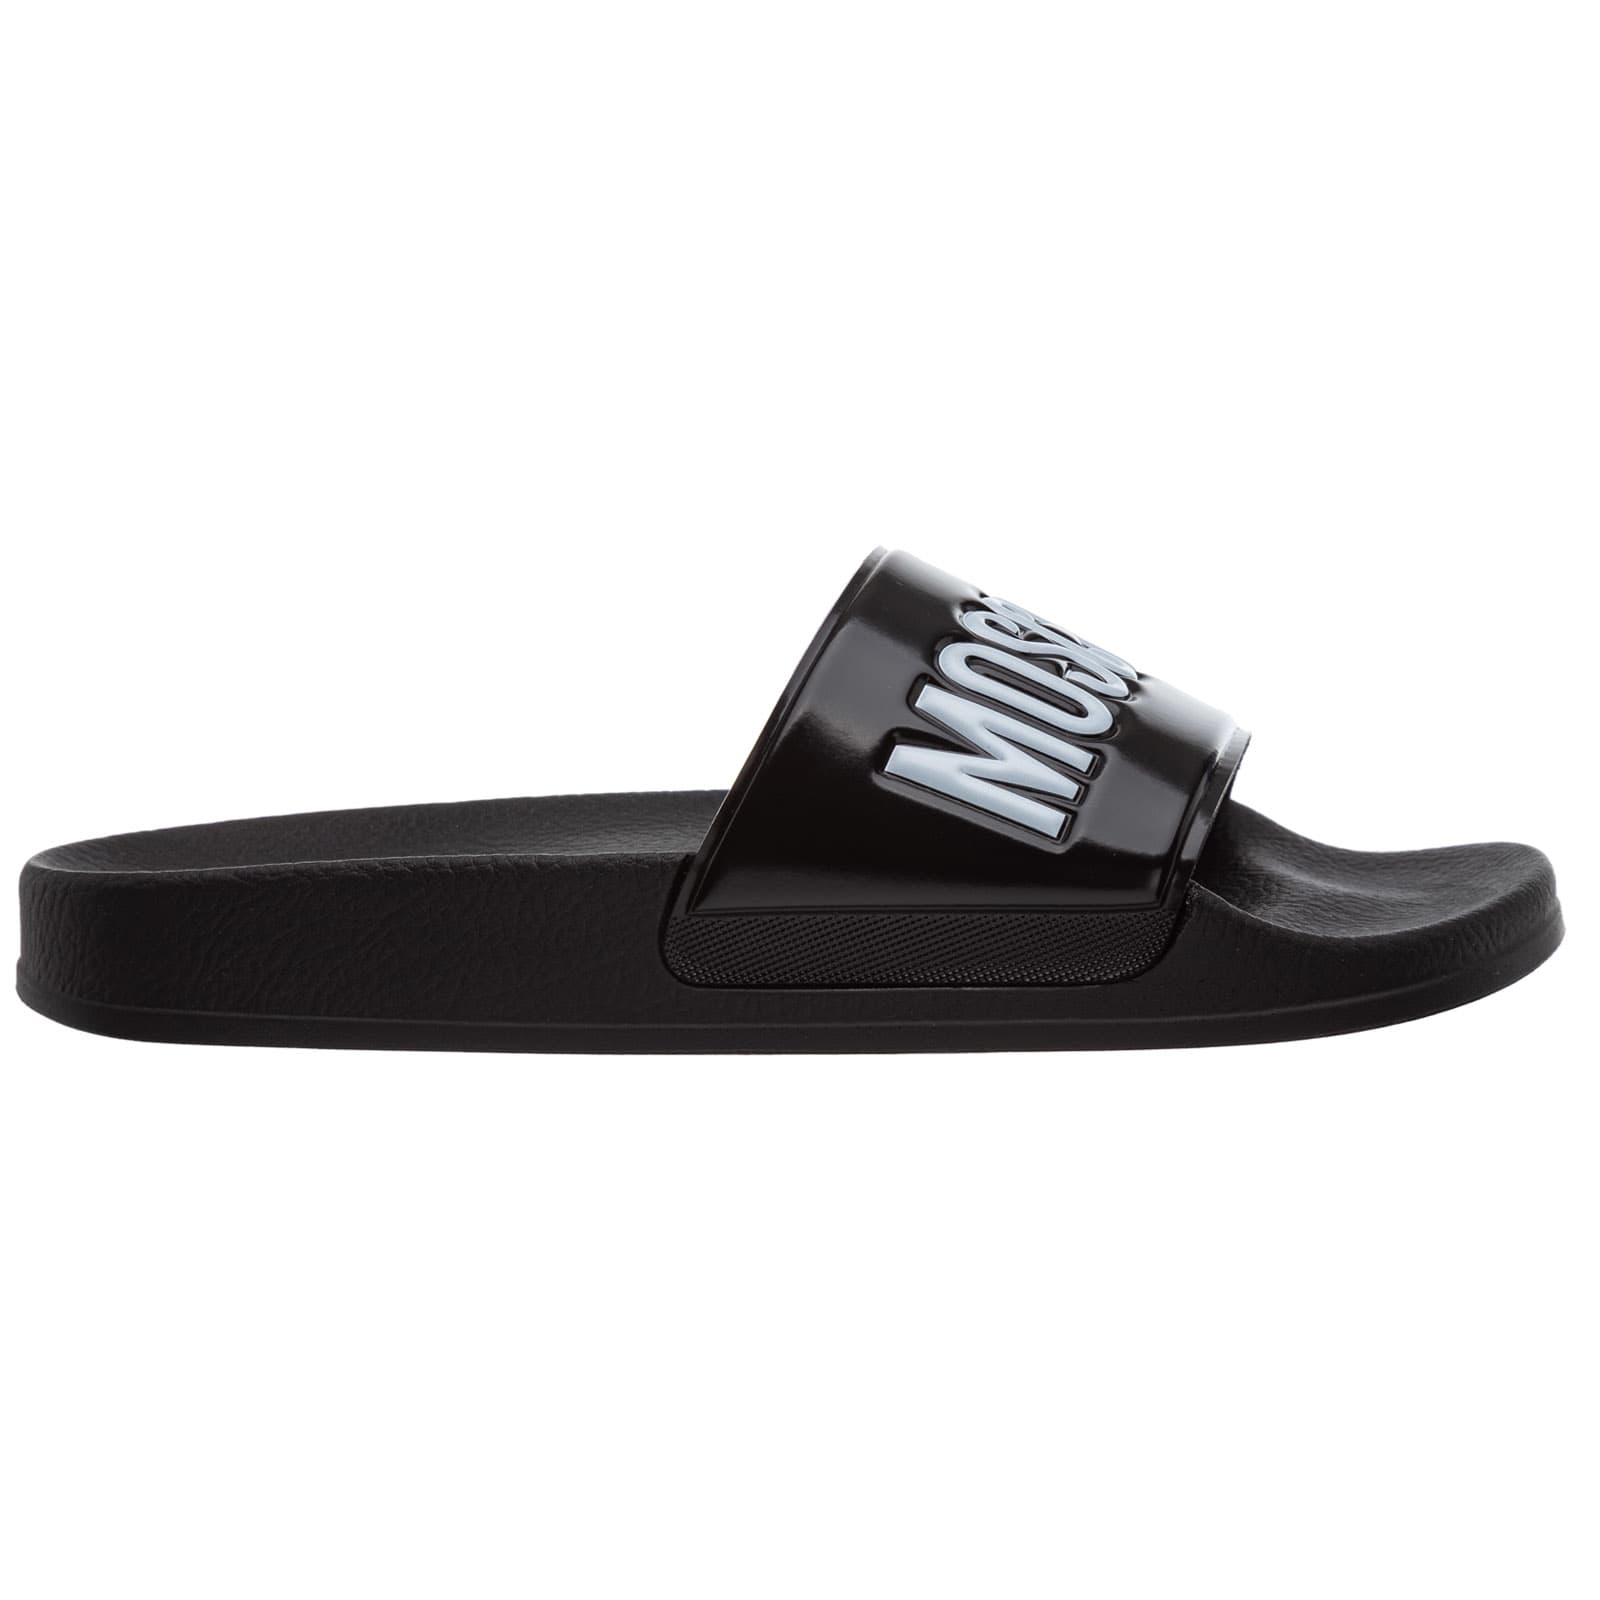 Buy Moschino Logo Slides online, shop Moschino shoes with free shipping